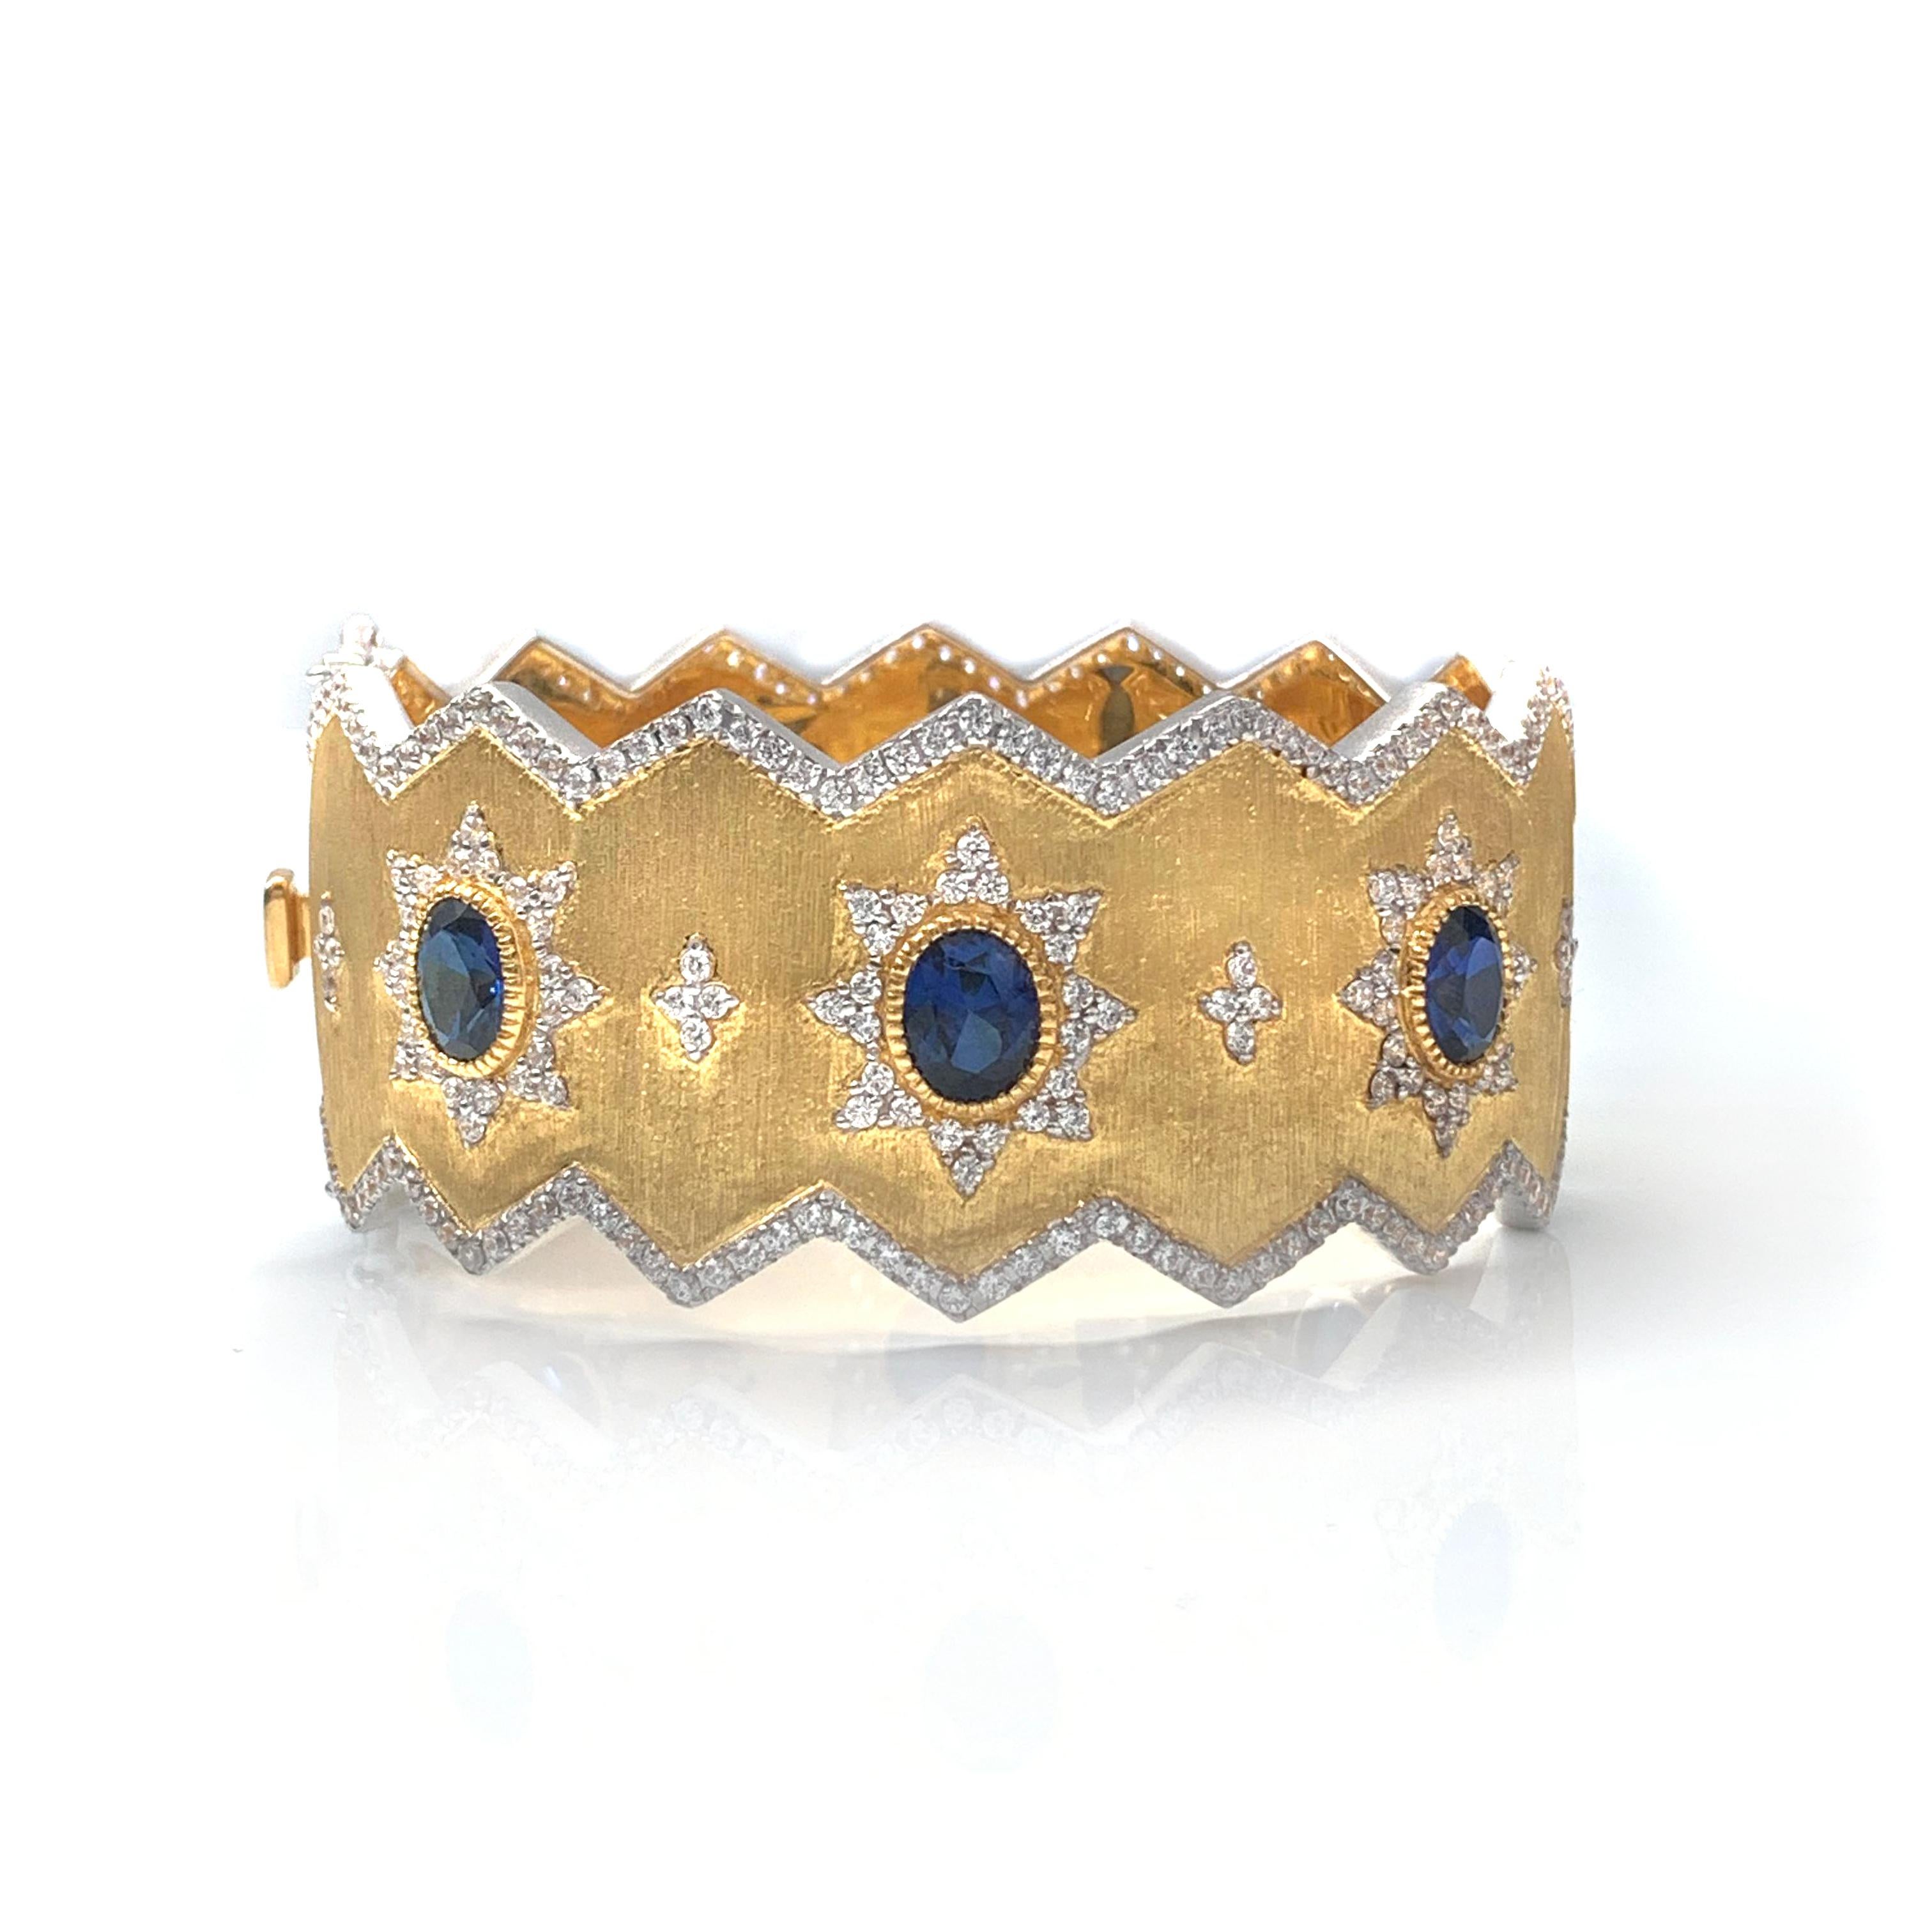 Fabulous Bijoux Num sterling silver lab-sapphire vermeil wide cuff bracelet. This bracelet features 6 oval lab-created sapphires (top quality) adorned with over 450 pcs of round faux diamond cubic zirconia (CZ), handcrafted Italian 